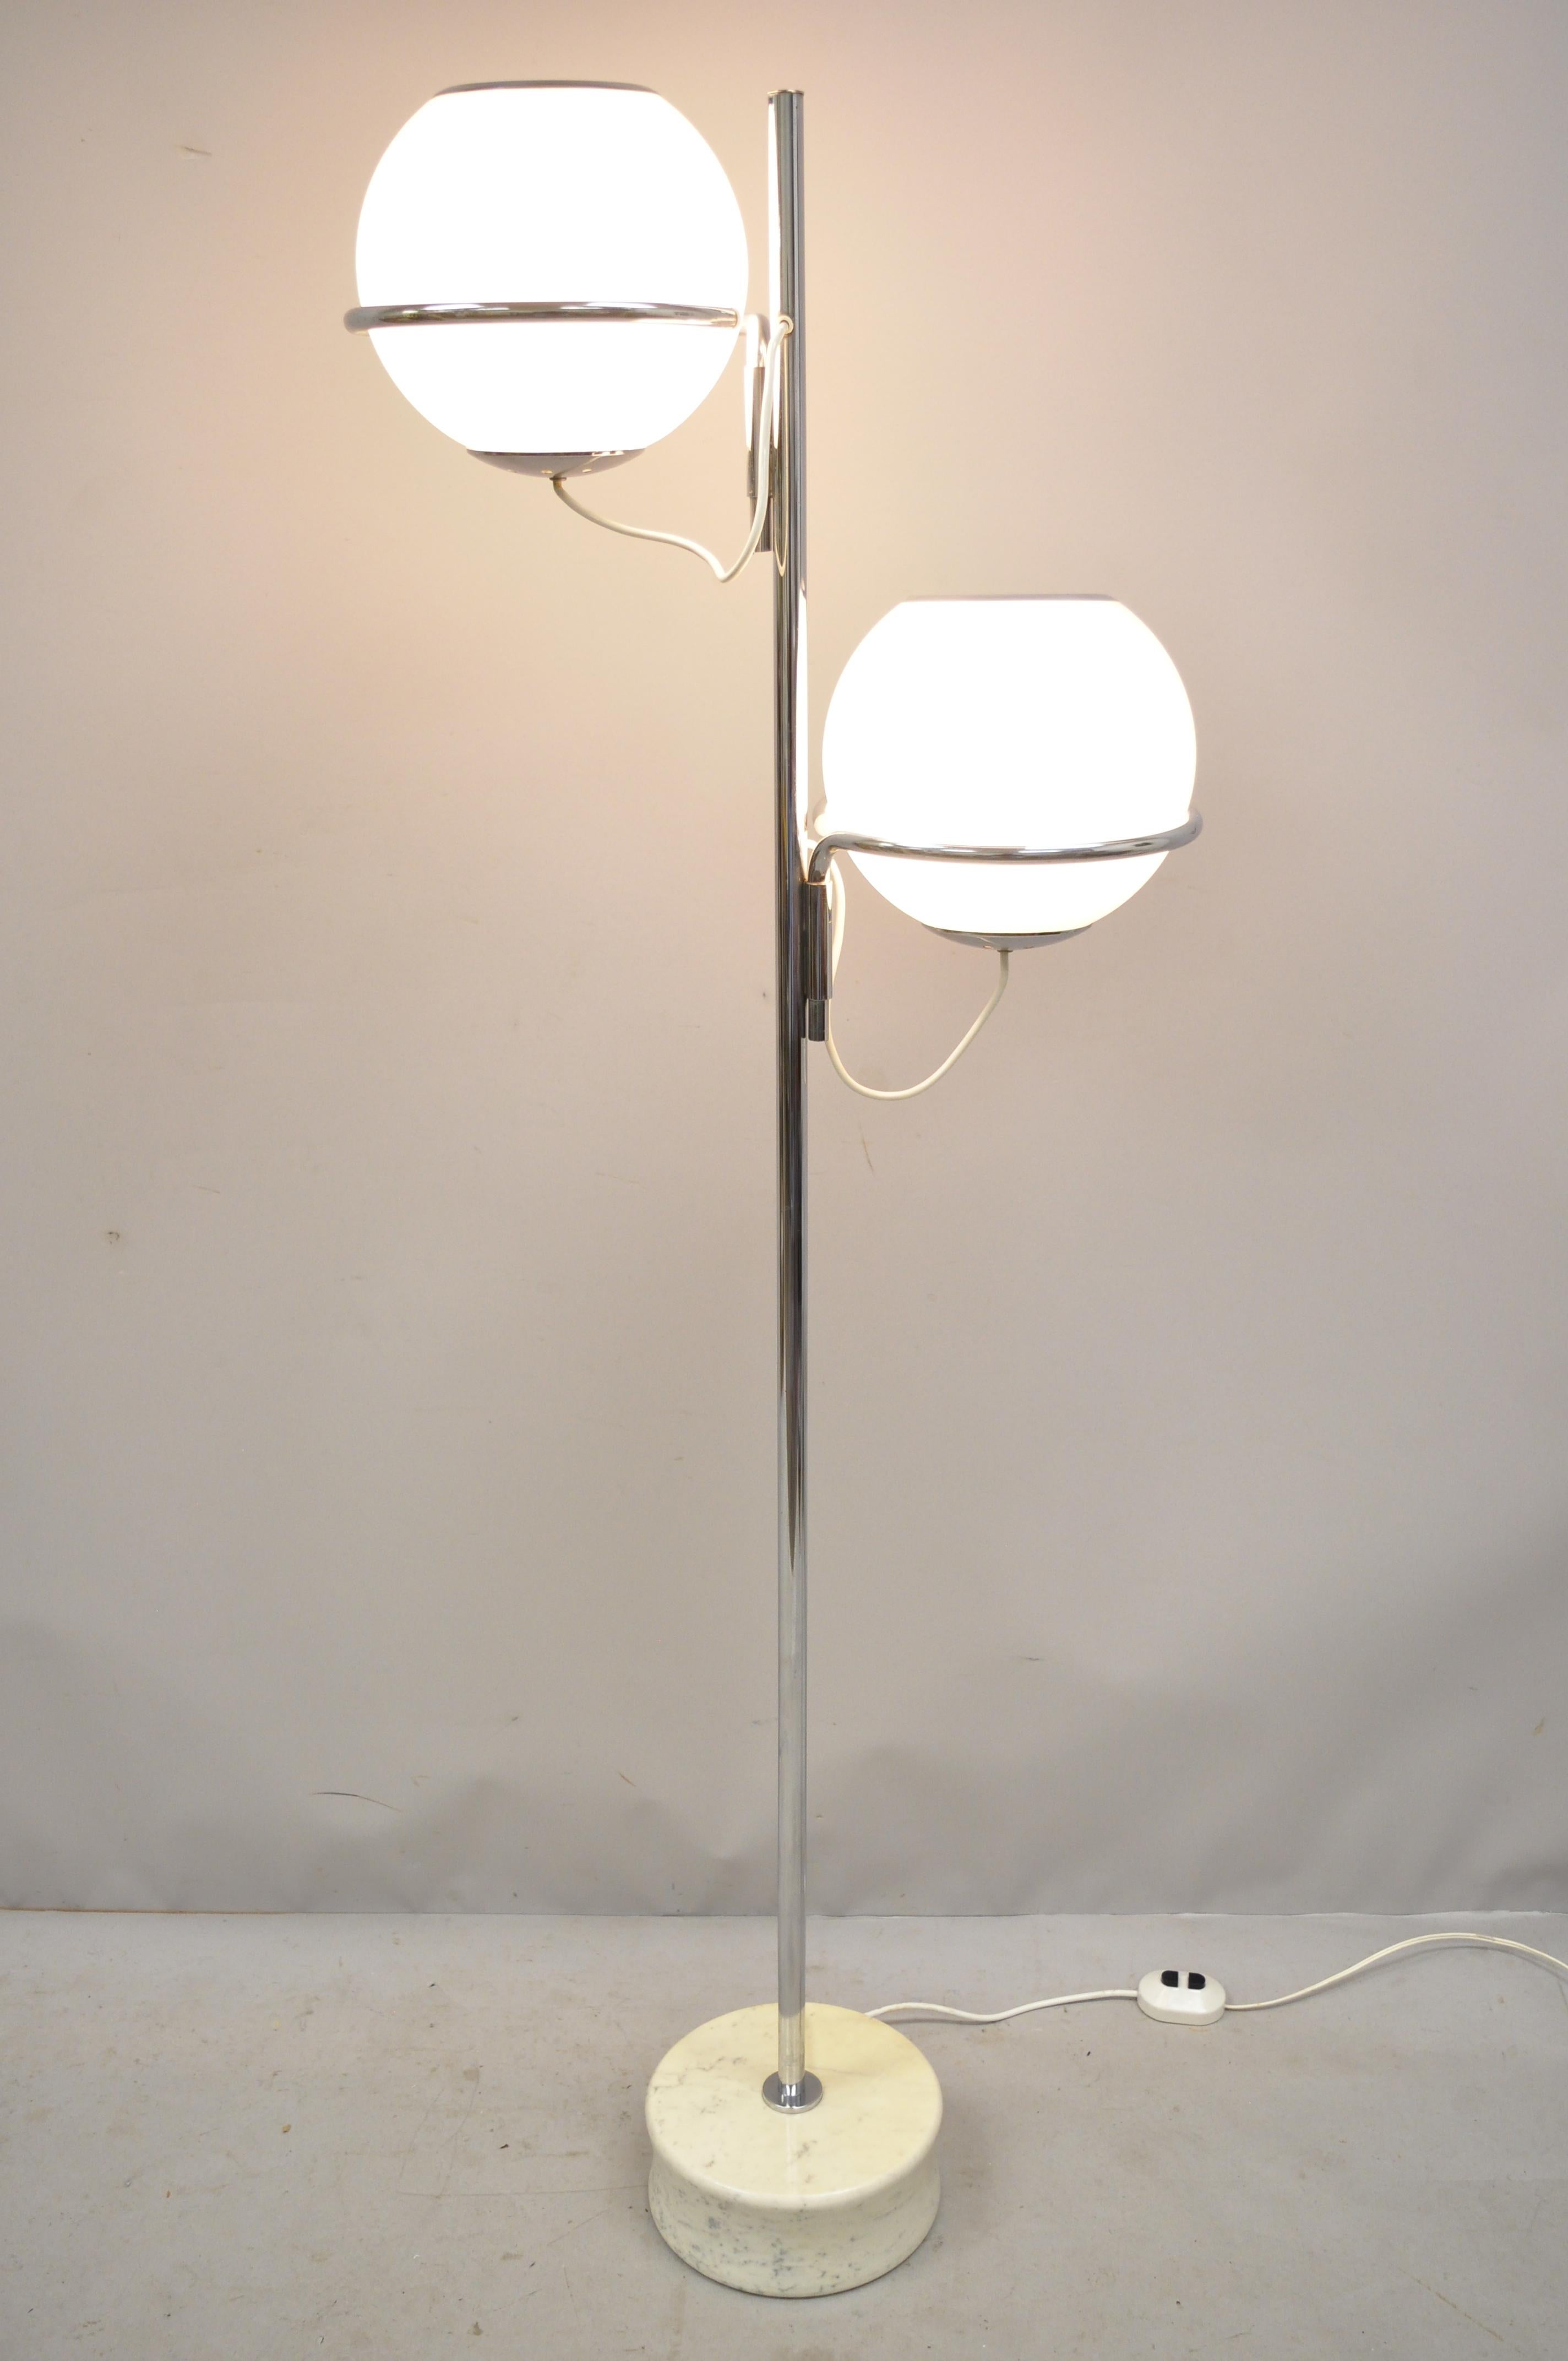 Reggiani midcentury Italian modern double glass orb chrome marble floor lamp. Item features marble base, chrome accents, glass orb shades, 3 different light settings, clean modernist lines, quality Italian craftsmanship, great style and form, circa